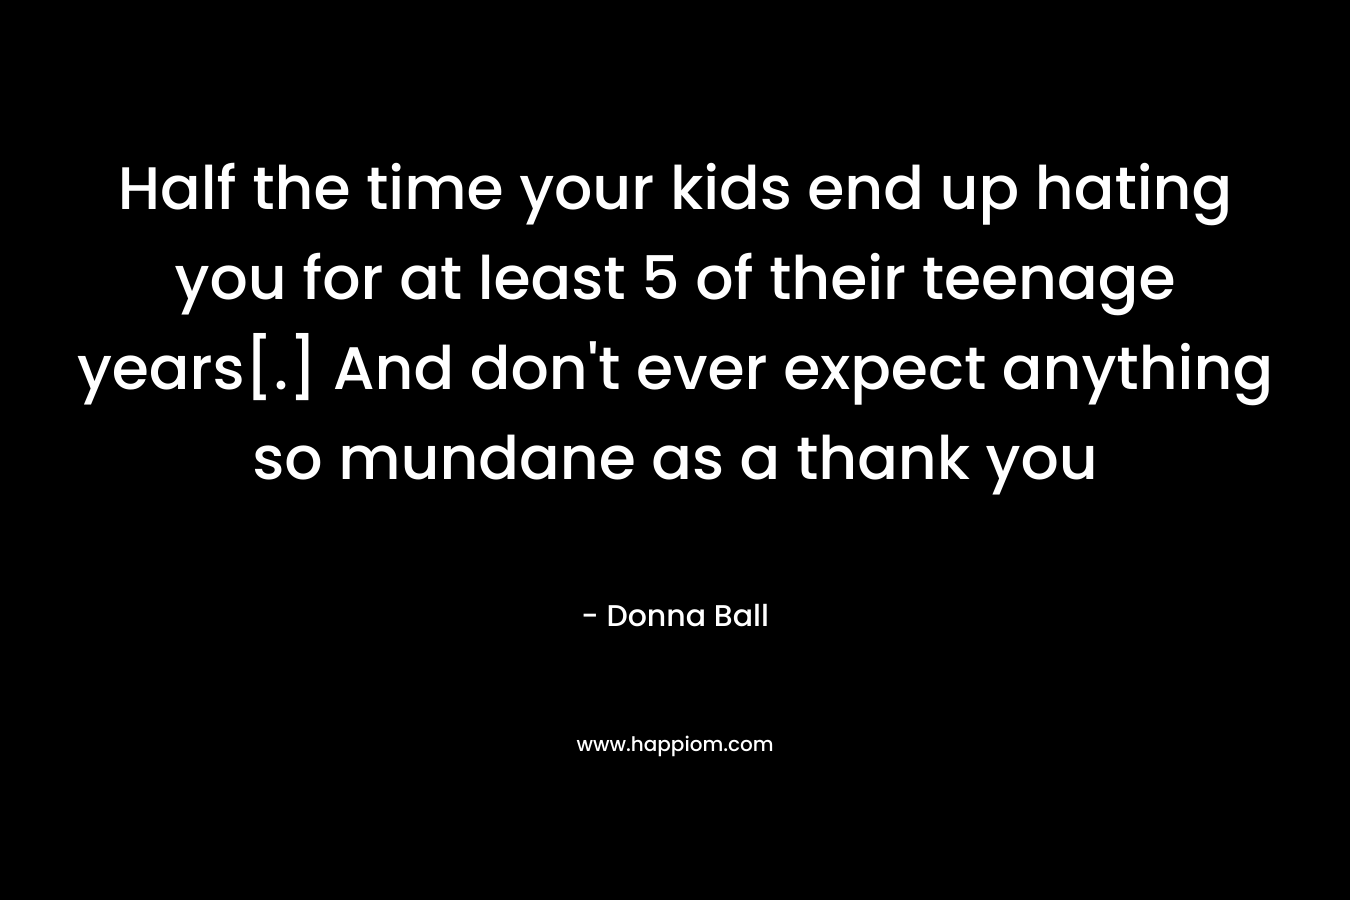 Half the time your kids end up hating you for at least 5 of their teenage years[.] And don’t ever expect anything so mundane as a thank you – Donna Ball